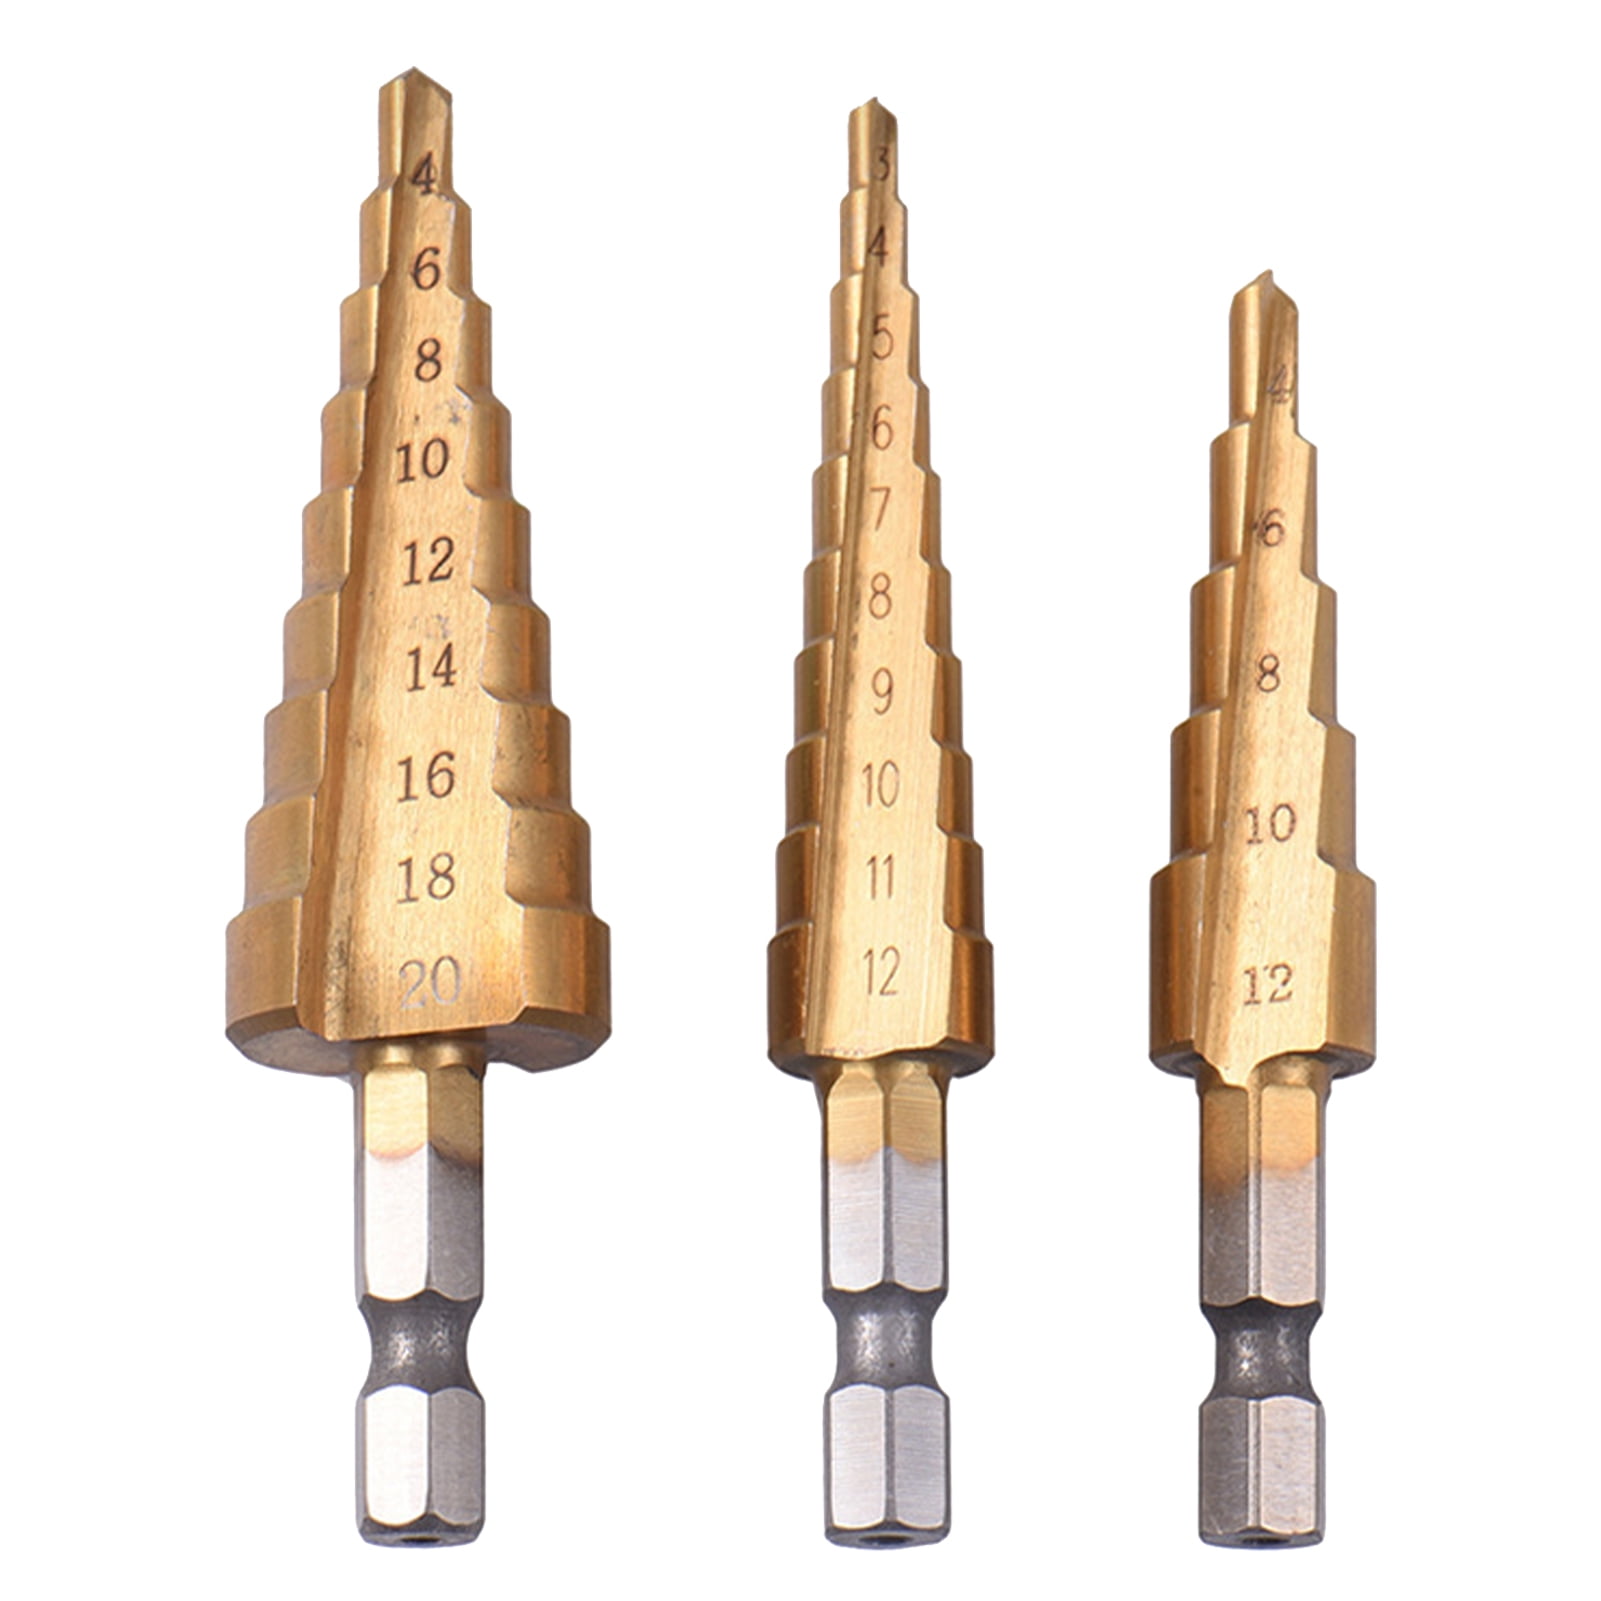 Details about   3pcs Hss Steel Titanium Coated Step Drill Bits 3-12mm 4-12mm 4-20mm Step Cone